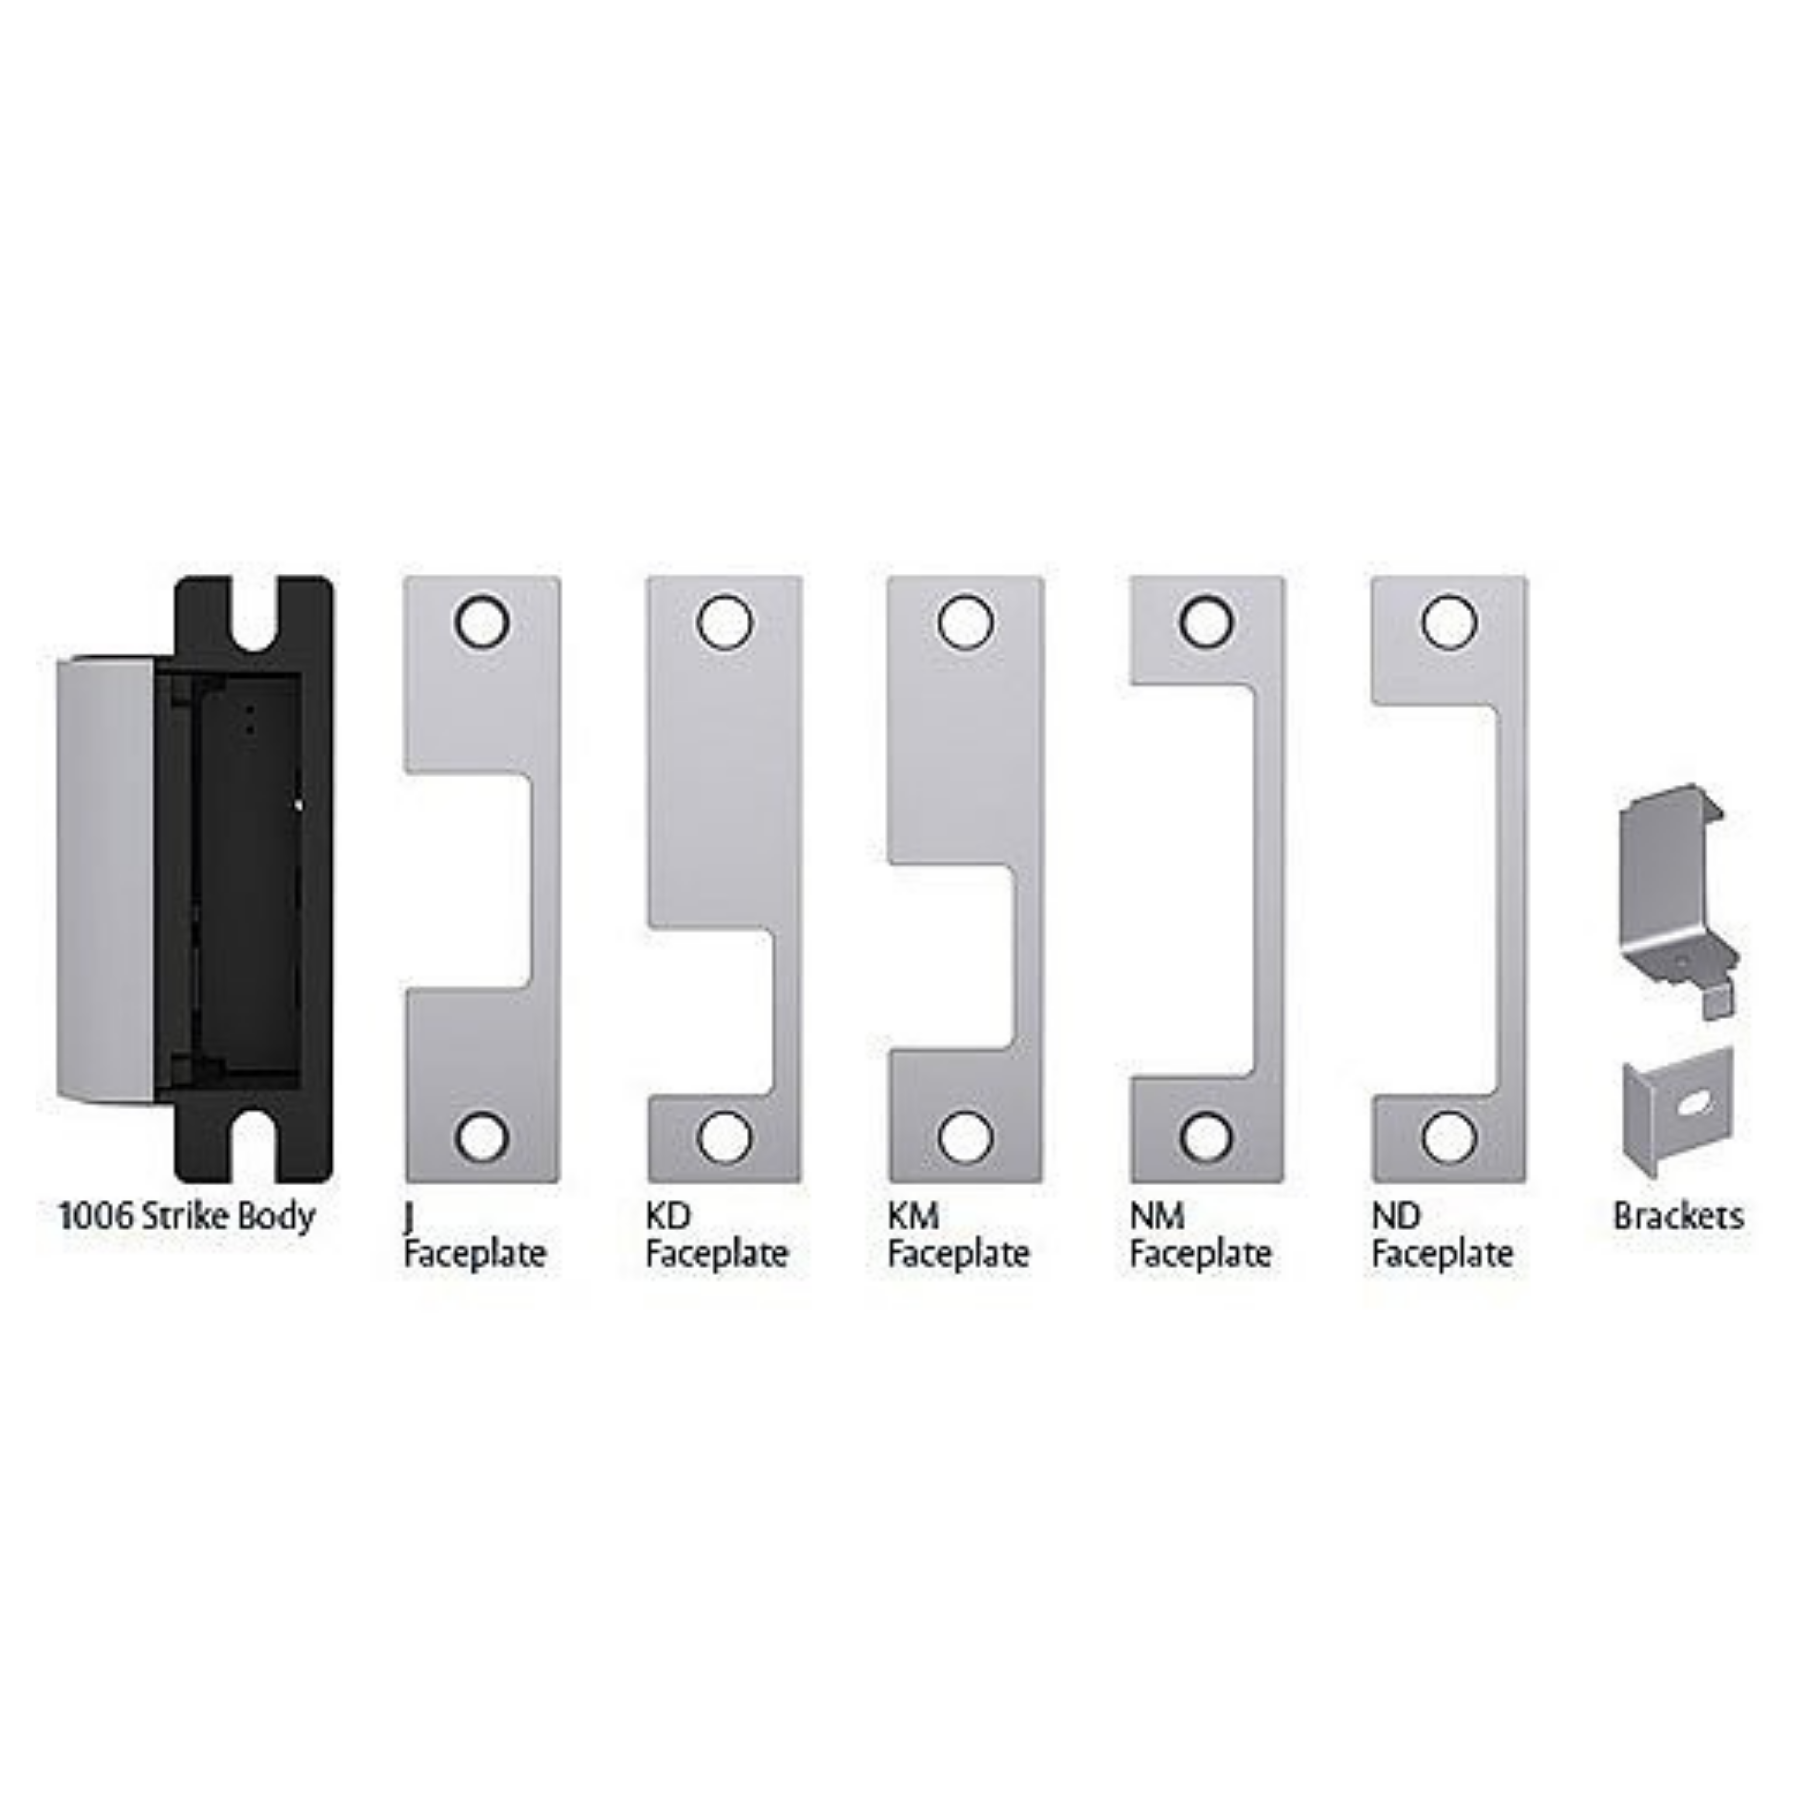 The 1006C Smart Strike is the strongest and most versatile electric strike available. This Complete One Box Solution includes all hardware necessary to fully accommodate any brand of cylindrical or mortise lockset that works with an ANSI 4-7/8" strike plate. It is the only electric strike that can release, recapture and contain mortise locks with a 1" deadbolt. The 1006CS is truly in a class of its own.